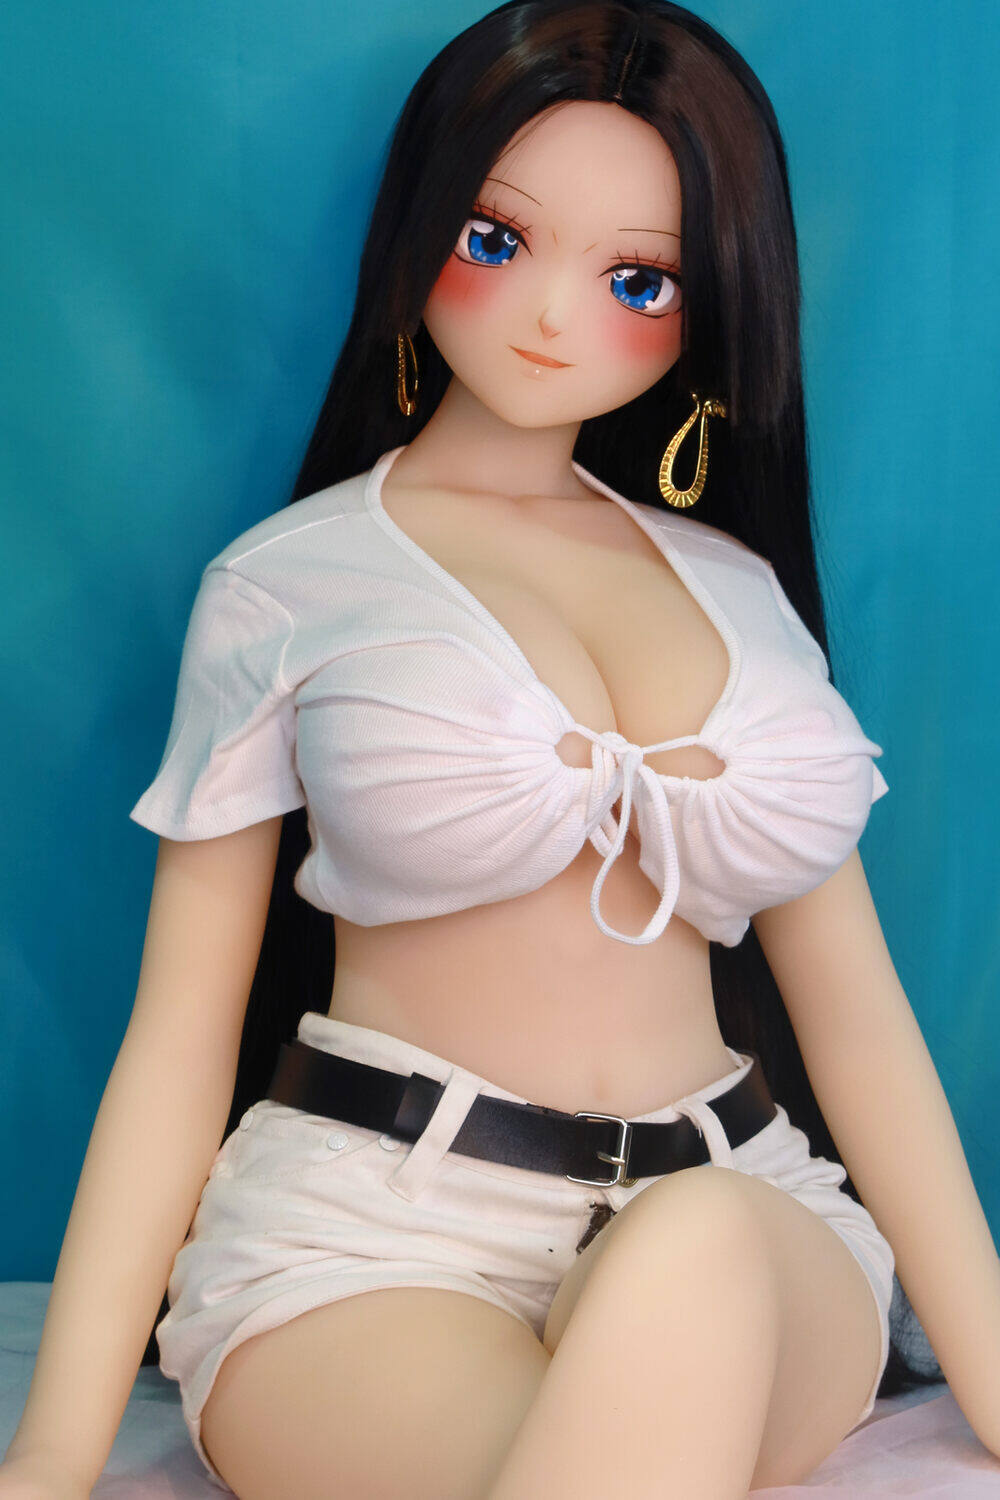 Justice-155cm(5ft1) Aotume Adult Doll H-Cup Normal Skin Tone Big Boobs TPE Dolls image4